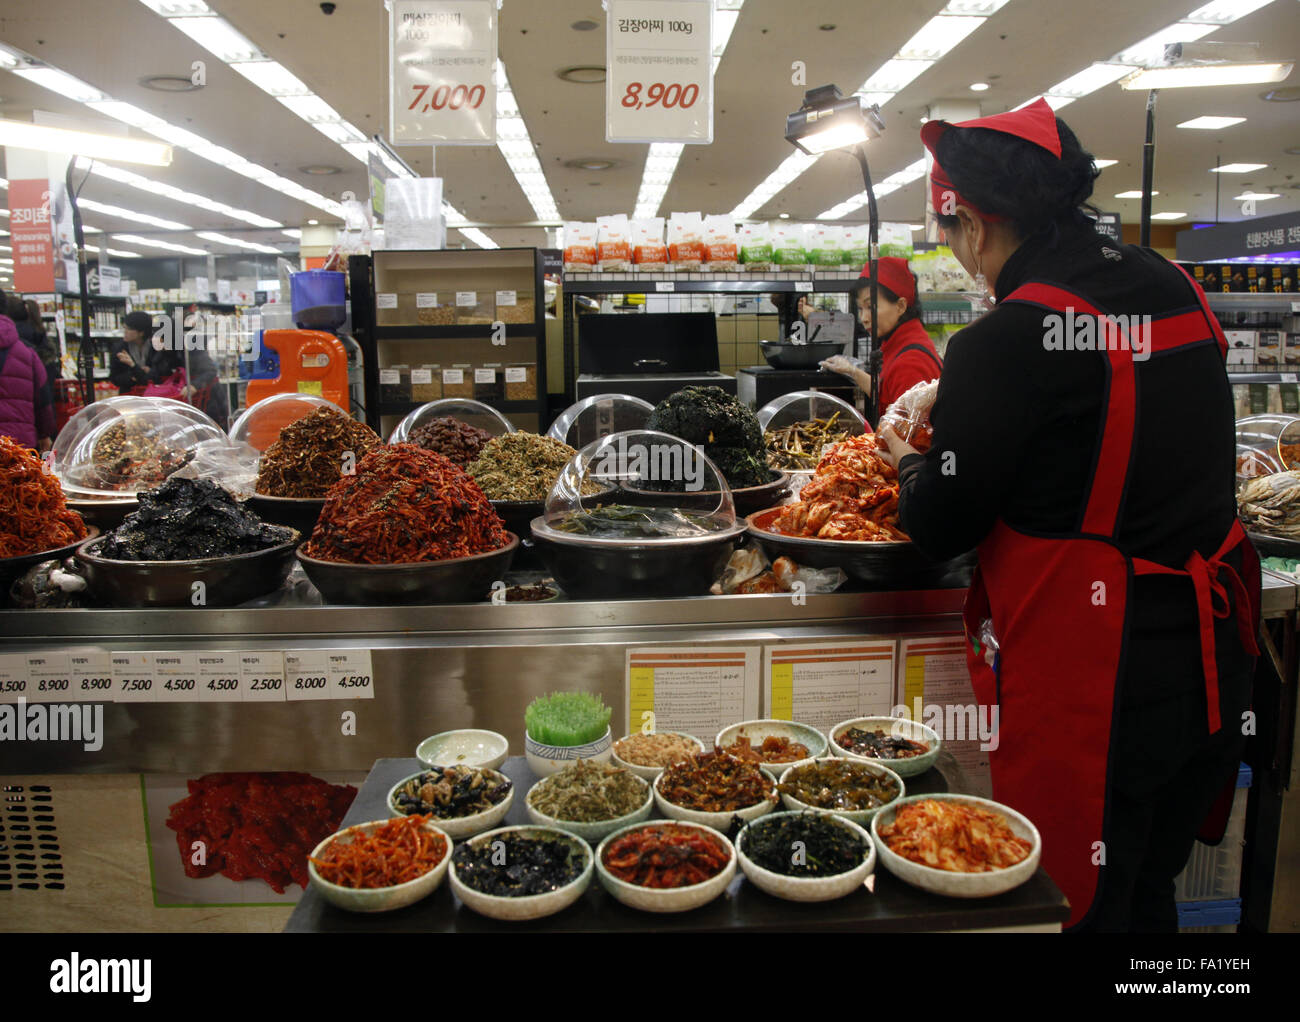 Seoul, Seoul, South Korea. 20th Dec, 2015. Photo taken on Dec. 20, 2015 shows a saleswoman selling pickled vegetables at a supermarket in Seoul, the Republic of Korea (ROK). China's free trade agreement (FTA) with the ROK took effect on Dec. 20, 2015. Under the deal, Seoul and Beijing will eliminate tariffs on more than 90 percent of traded goods within 20 years. © Yao Qilin/Xinhua/Alamy Live News Stock Photo